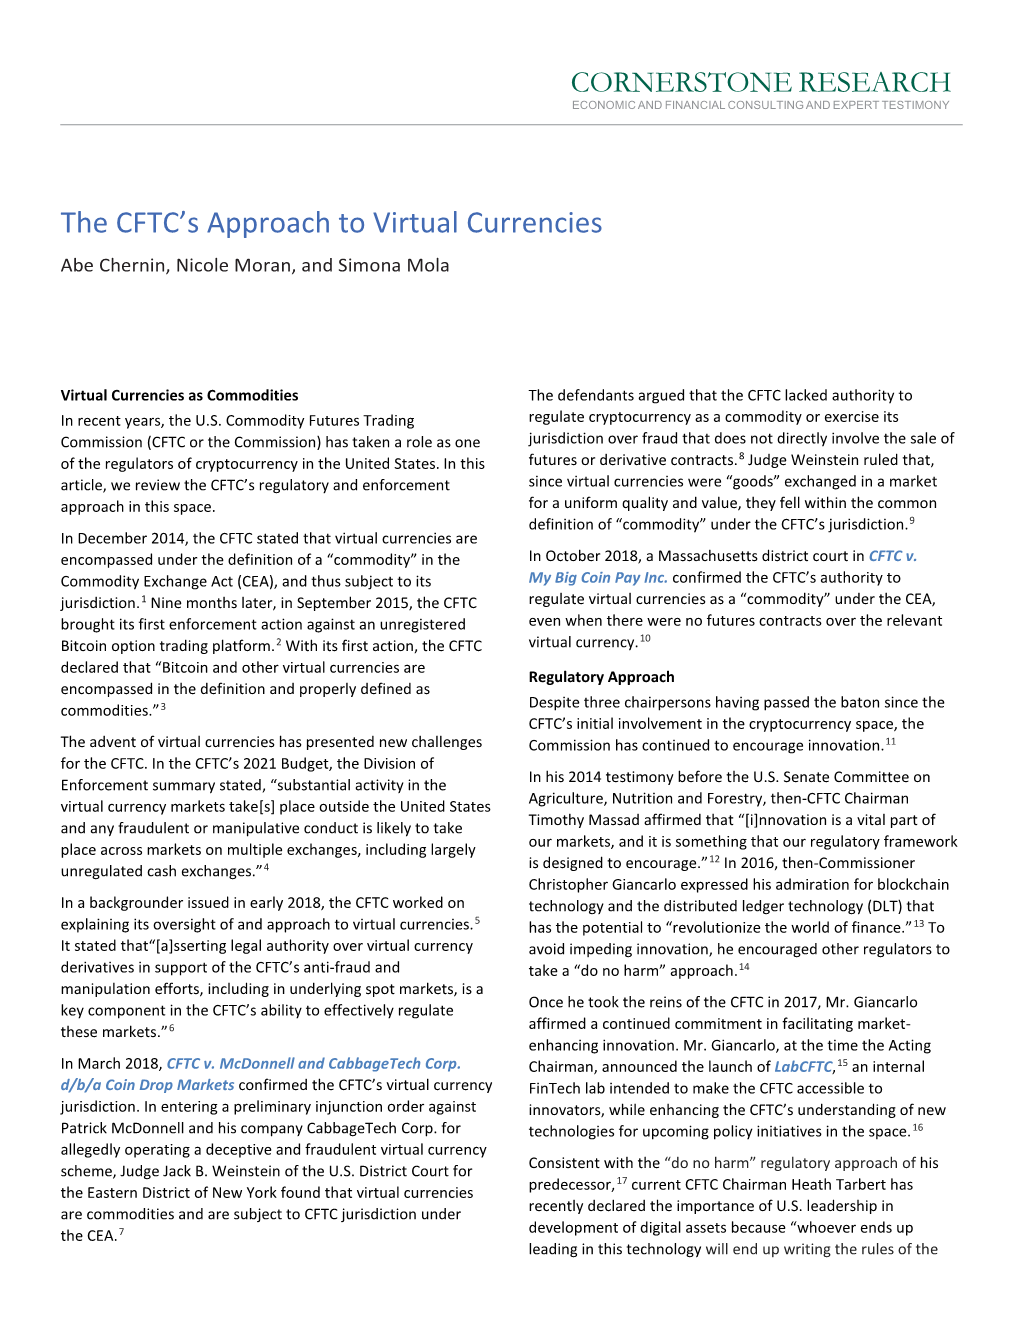 The CFTC's Approach to Virtual Currencies